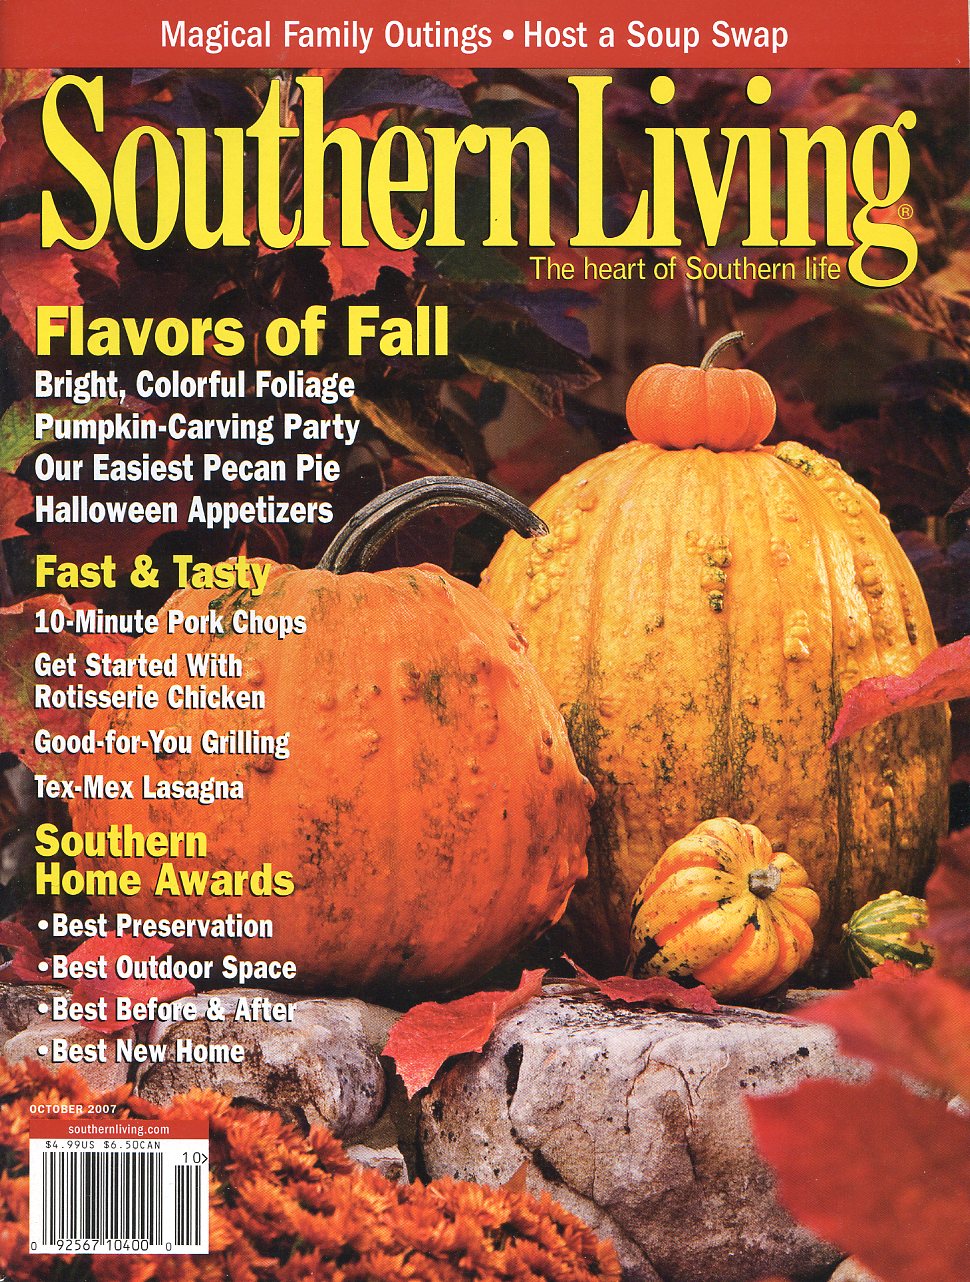 Southern Living October 2007 – Missing Magazines